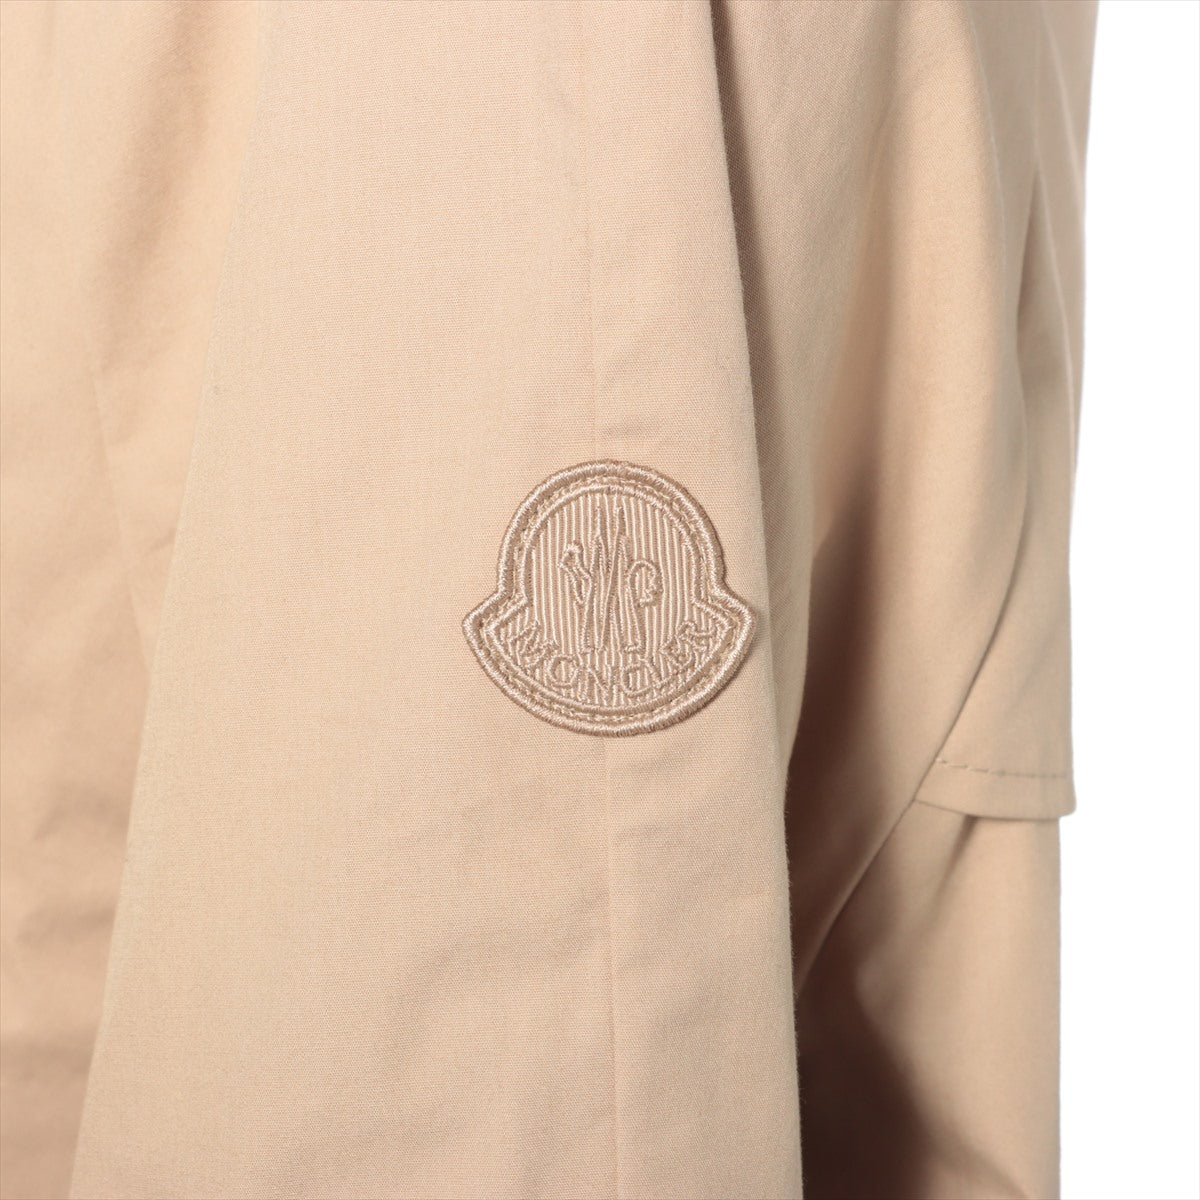 Moncler 20 Years Cotton x Polyester Trance Coat 0  Beige Adhafera